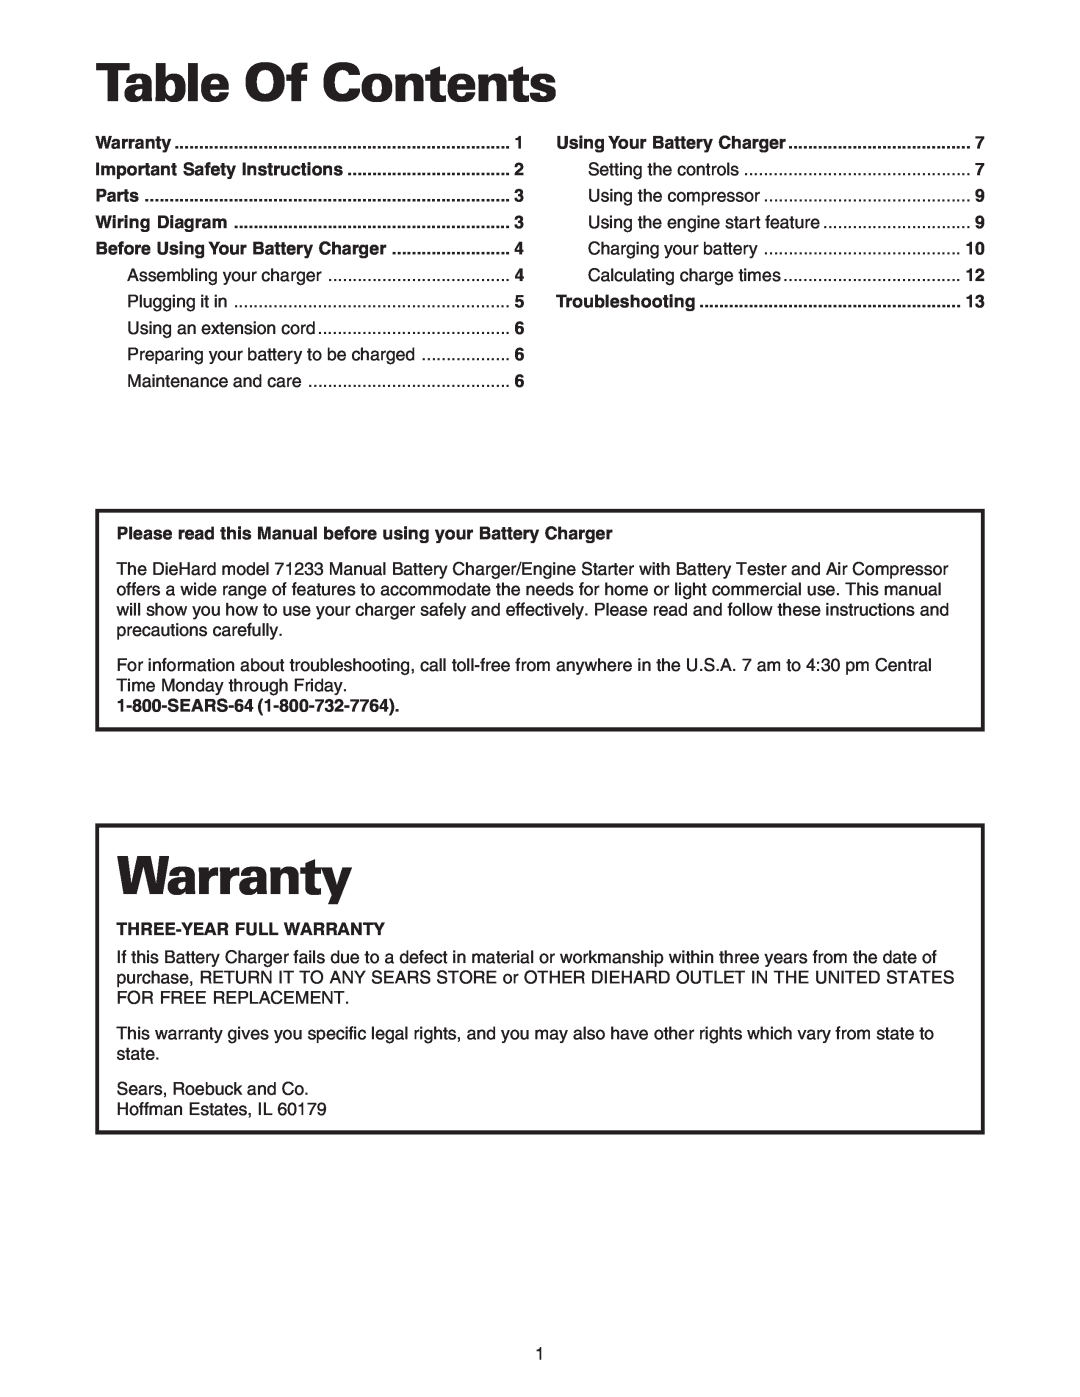 Sears 200.71233 Table Of Contents, Warranty, Assembling your charger, Plugging it in, Using an extension cord, SEARS-64 